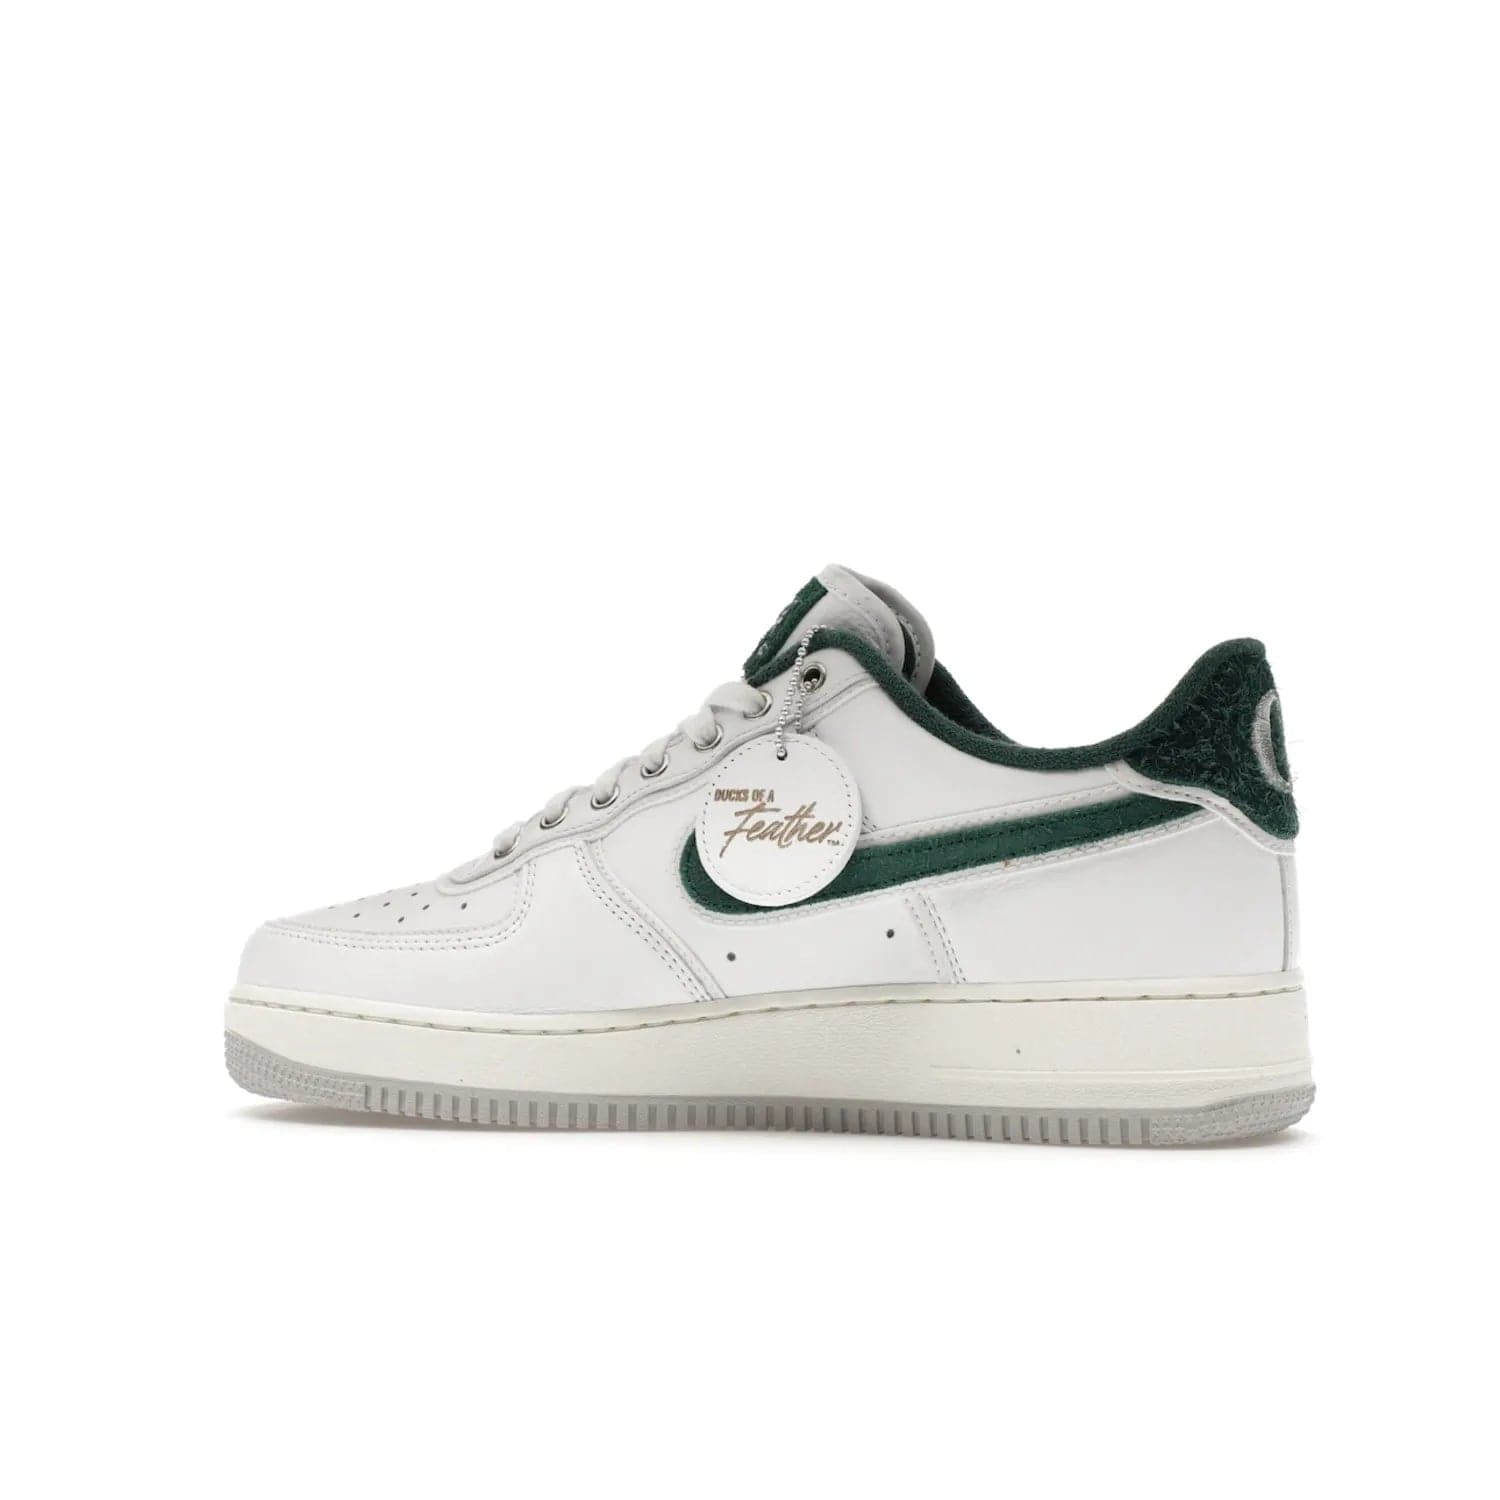 Nike Air Force 1 Low '07 Premium University of Oregon PE - Image 21 - Only at www.BallersClubKickz.com - The Nike Air Force 1 Low '07 Premium. Special Oregon University colorway. White base with green and sail accents. Cushioned rubber midsole. Comfort and style. Support your school!